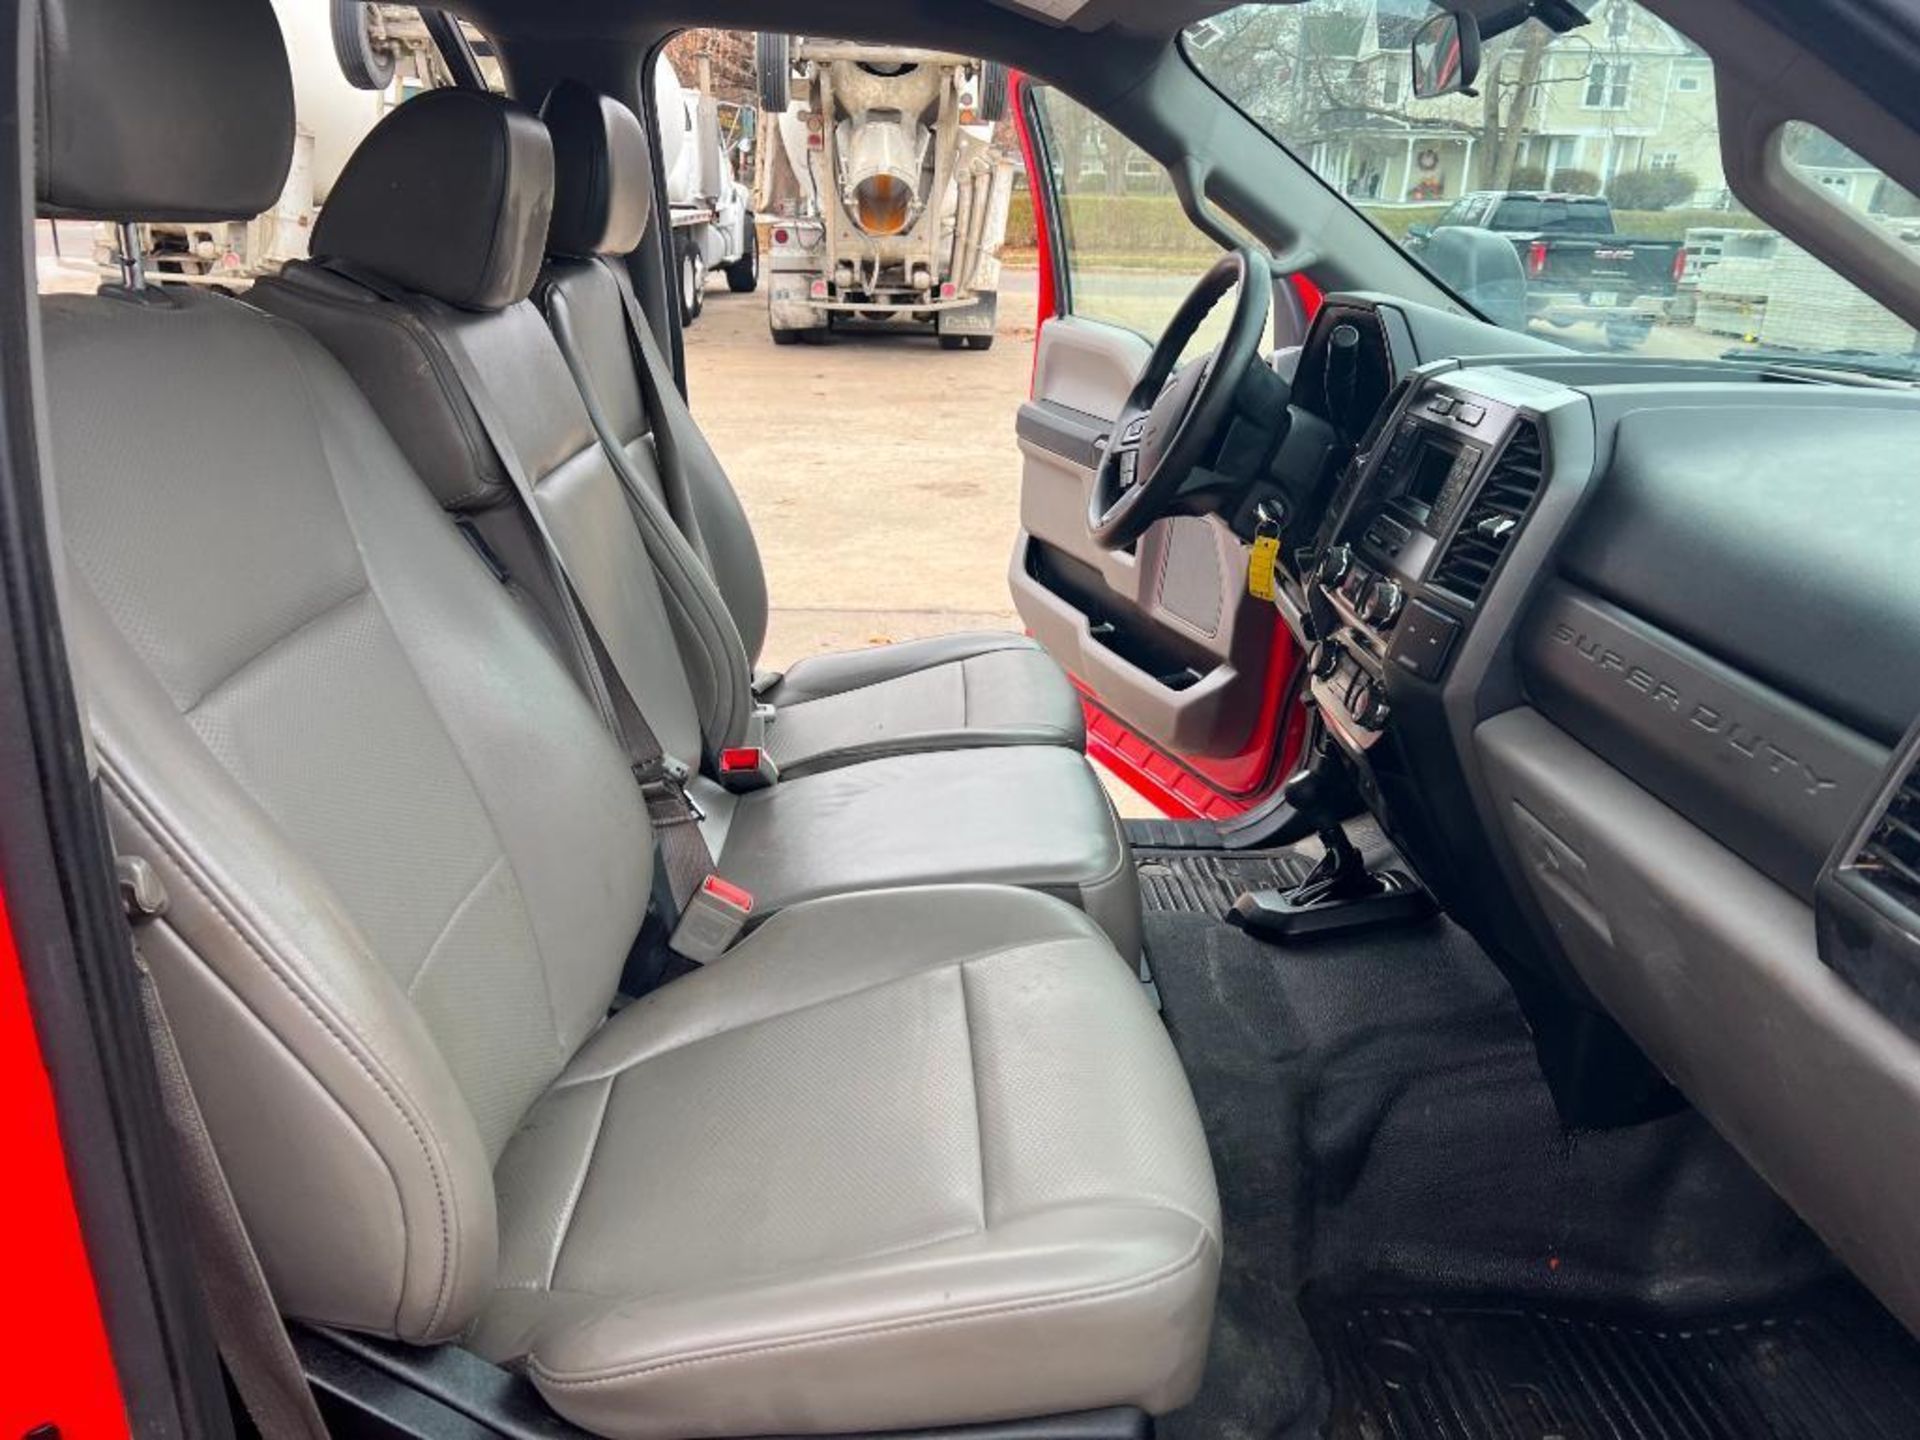 2019 Ford F550 4X4 Crew Cab Truck, VIN #1FD0W5HT1KEE51904, Miles 111,556, 6-Speed Automatic Transmis - Image 26 of 29